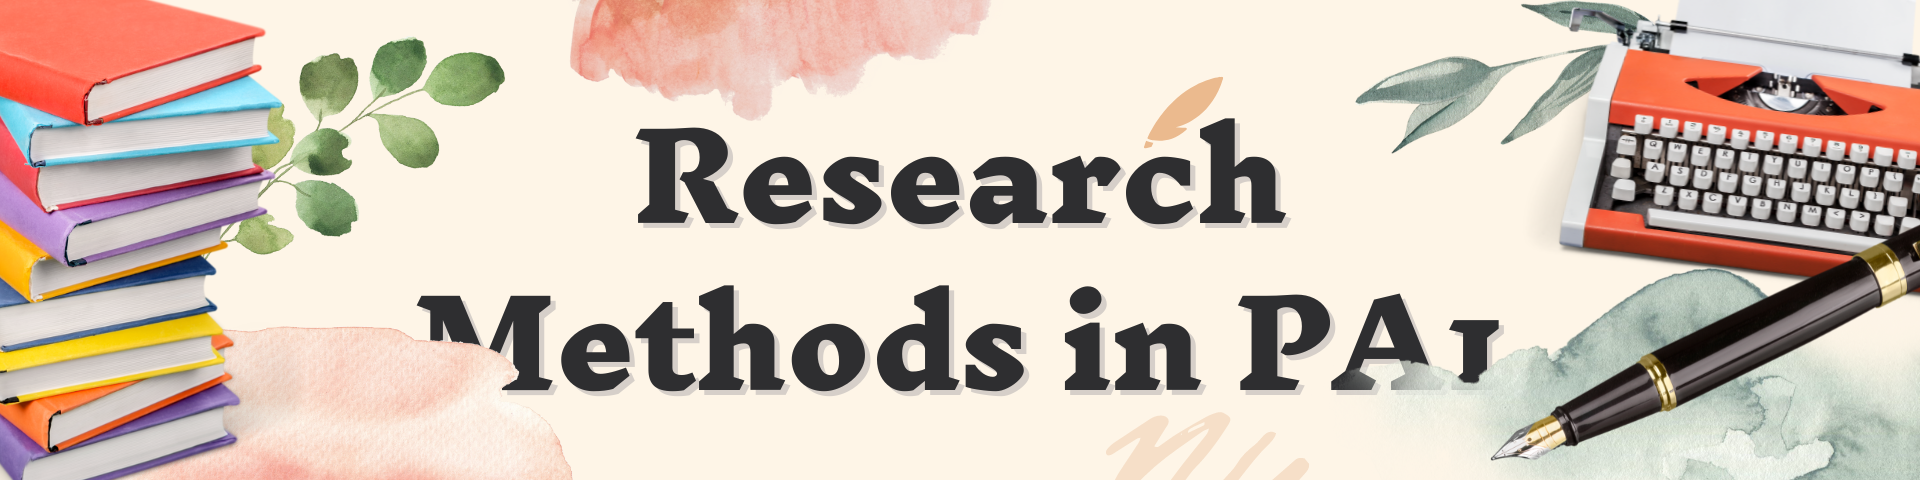 Research Methods in PA1